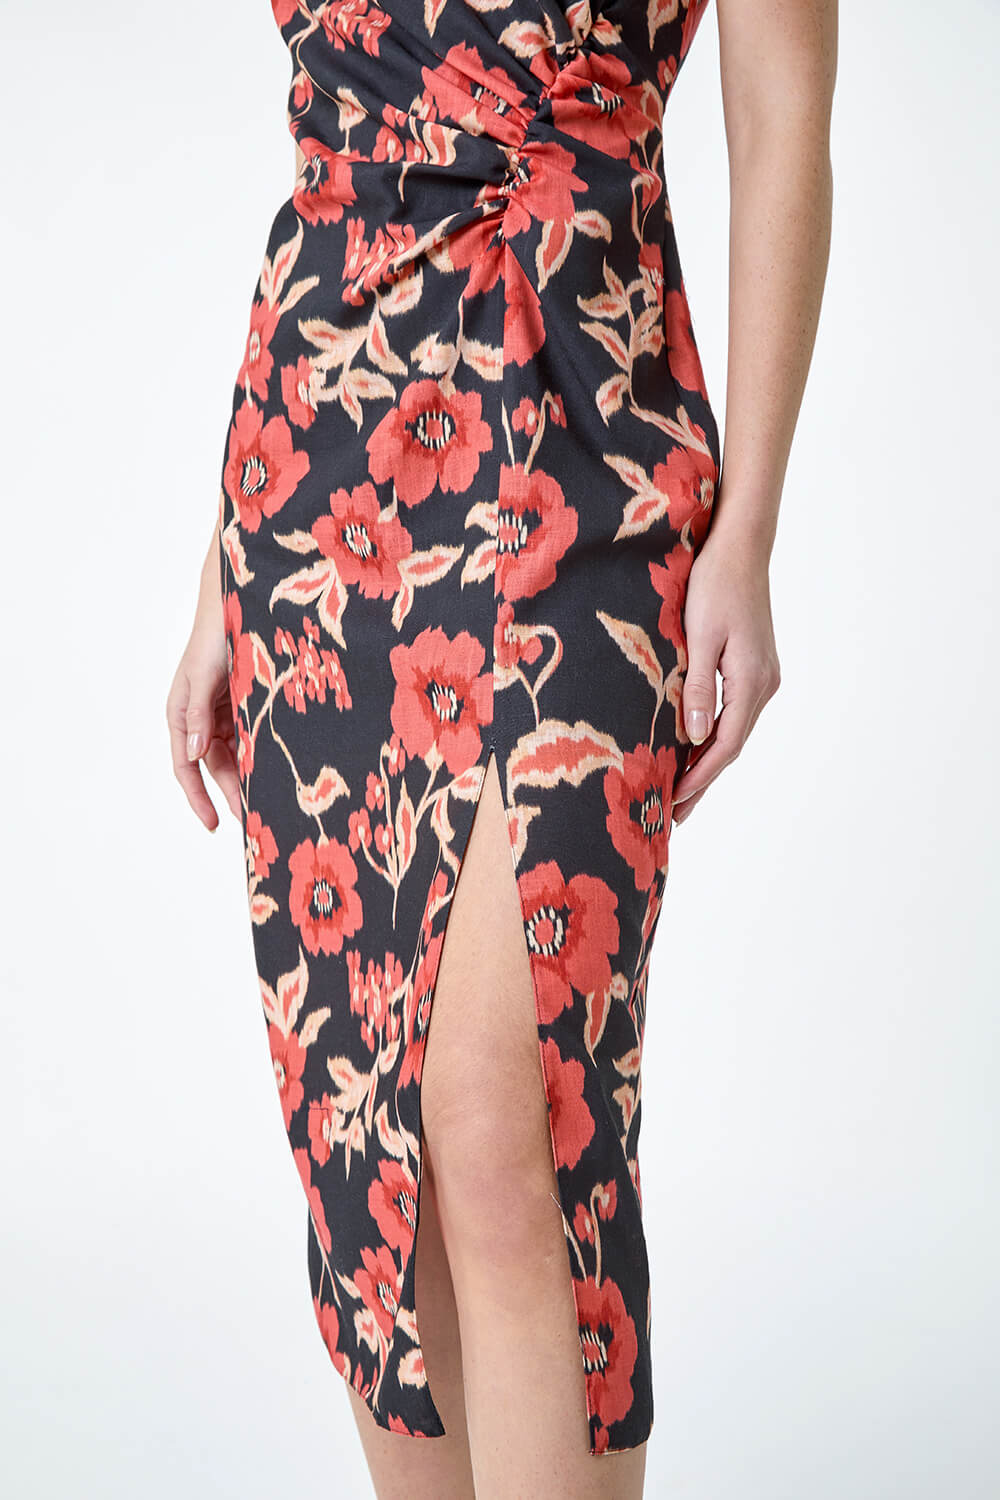 Black Floral Linen Look Ruched Midi Dress, Image 5 of 5